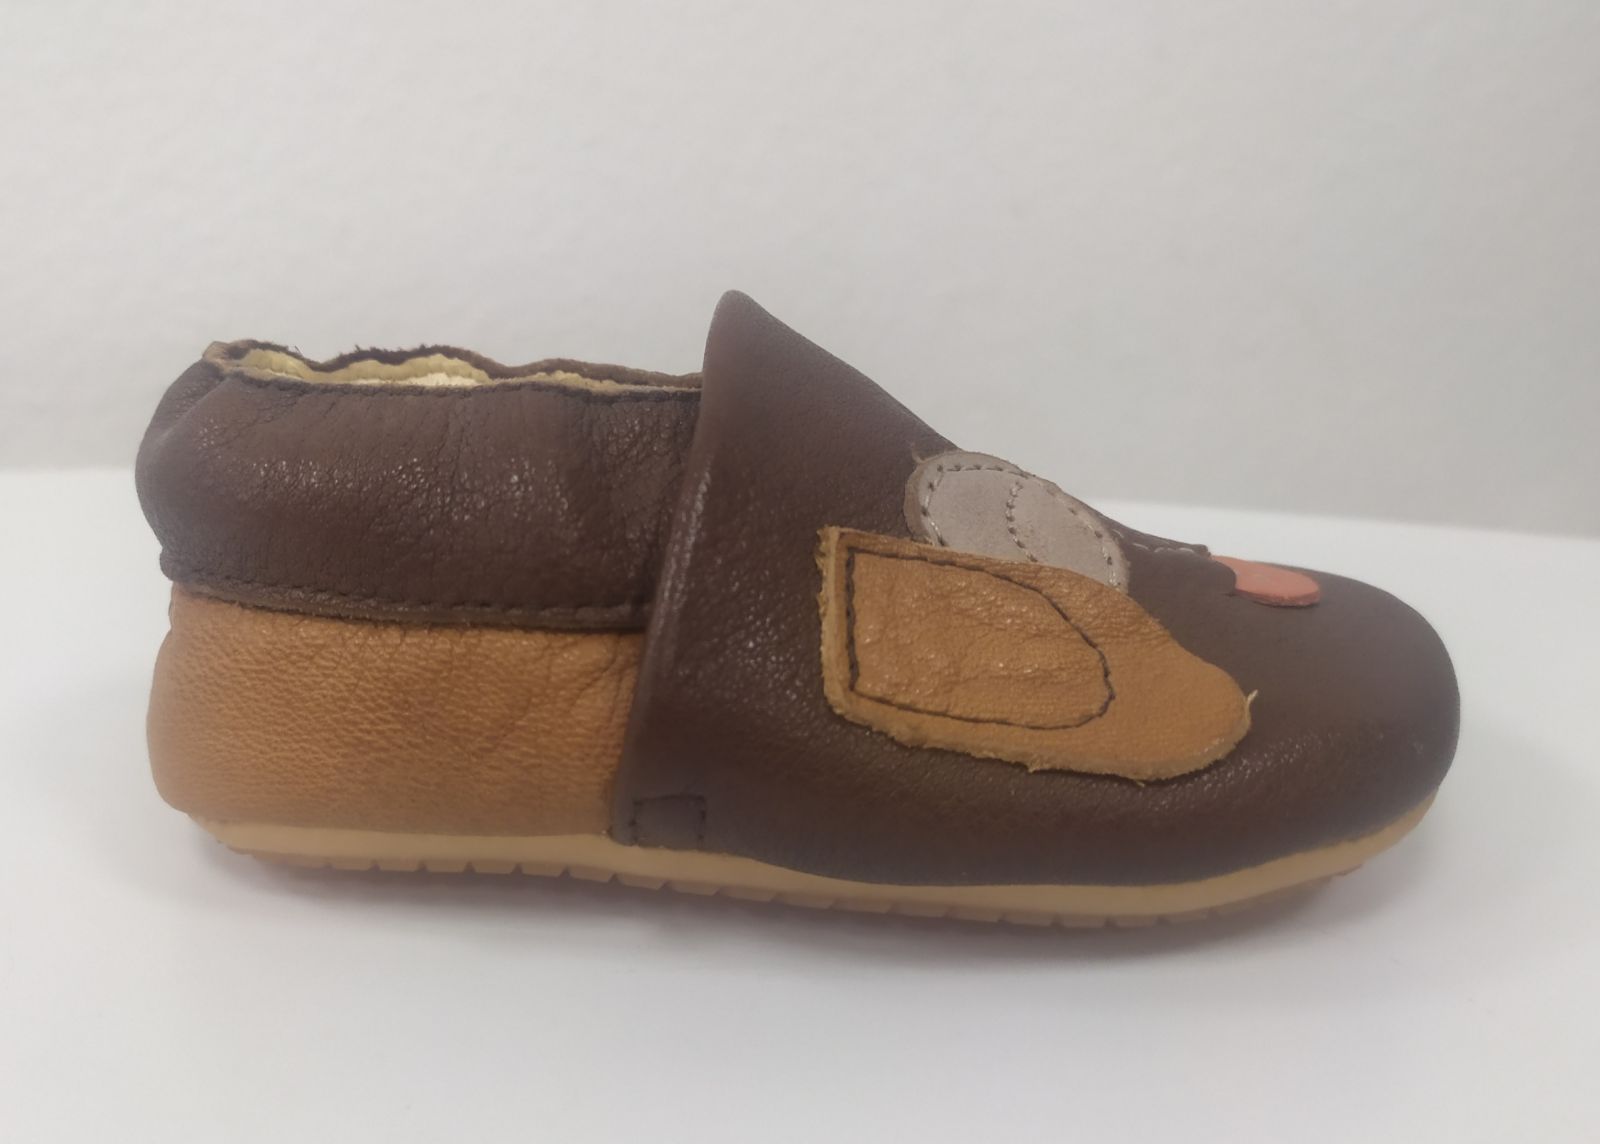 Barefoot Froddo prewalkers slippers with rubber sole - brown with a dog